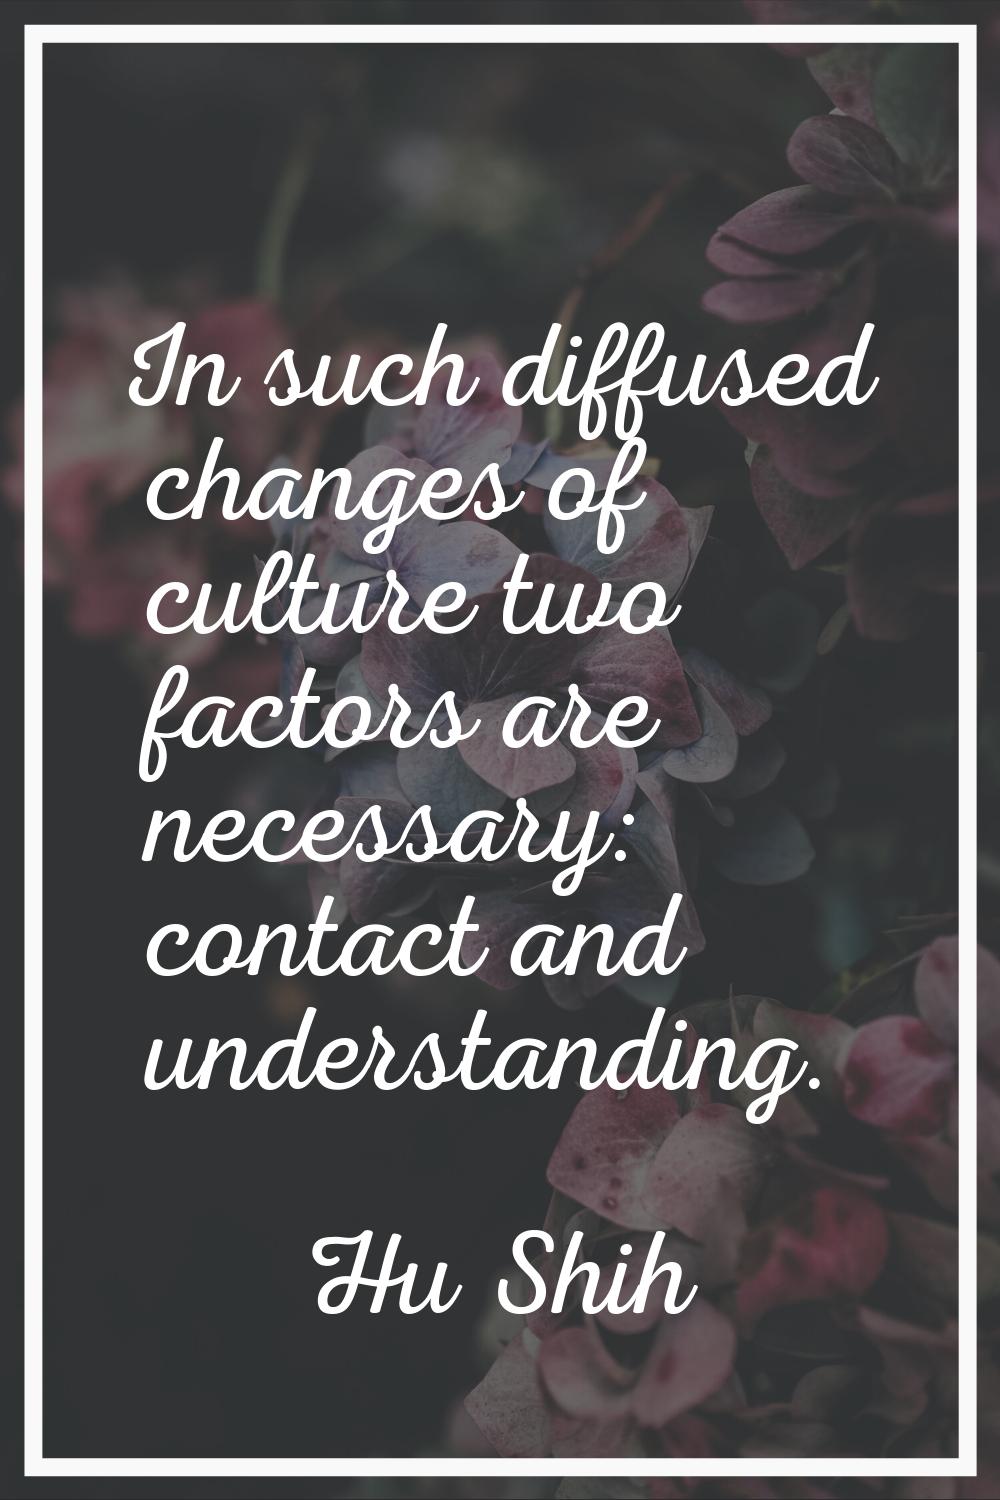 In such diffused changes of culture two factors are necessary: contact and understanding.